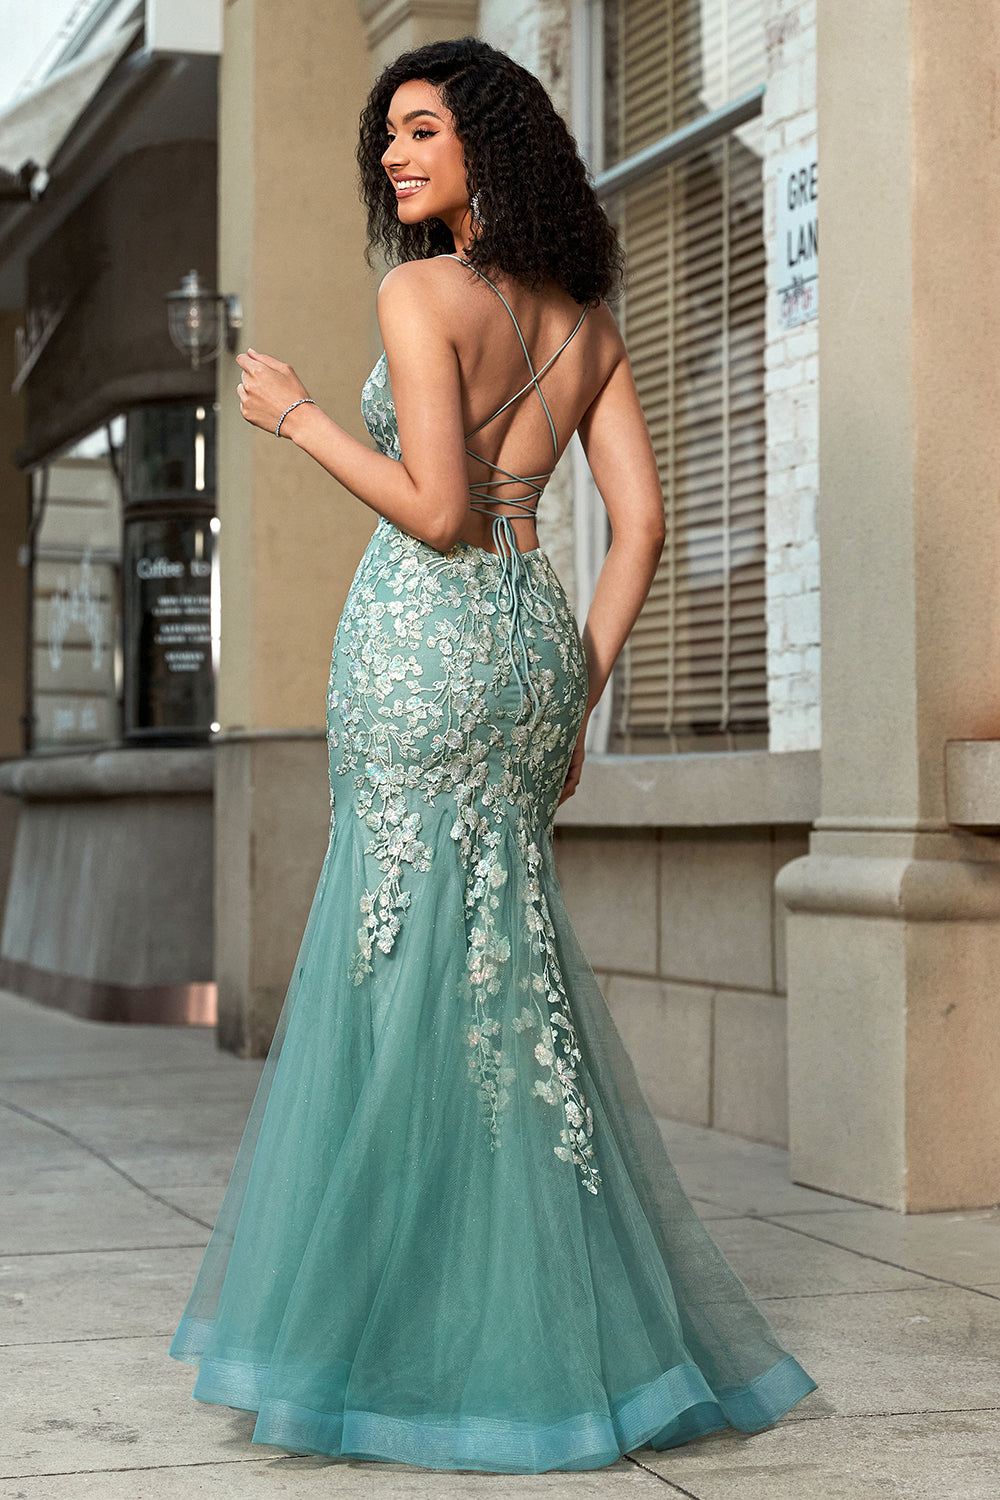 Stunning Mermaid Spaghetti Straps Light Green Corset Prom Dress with Appliques